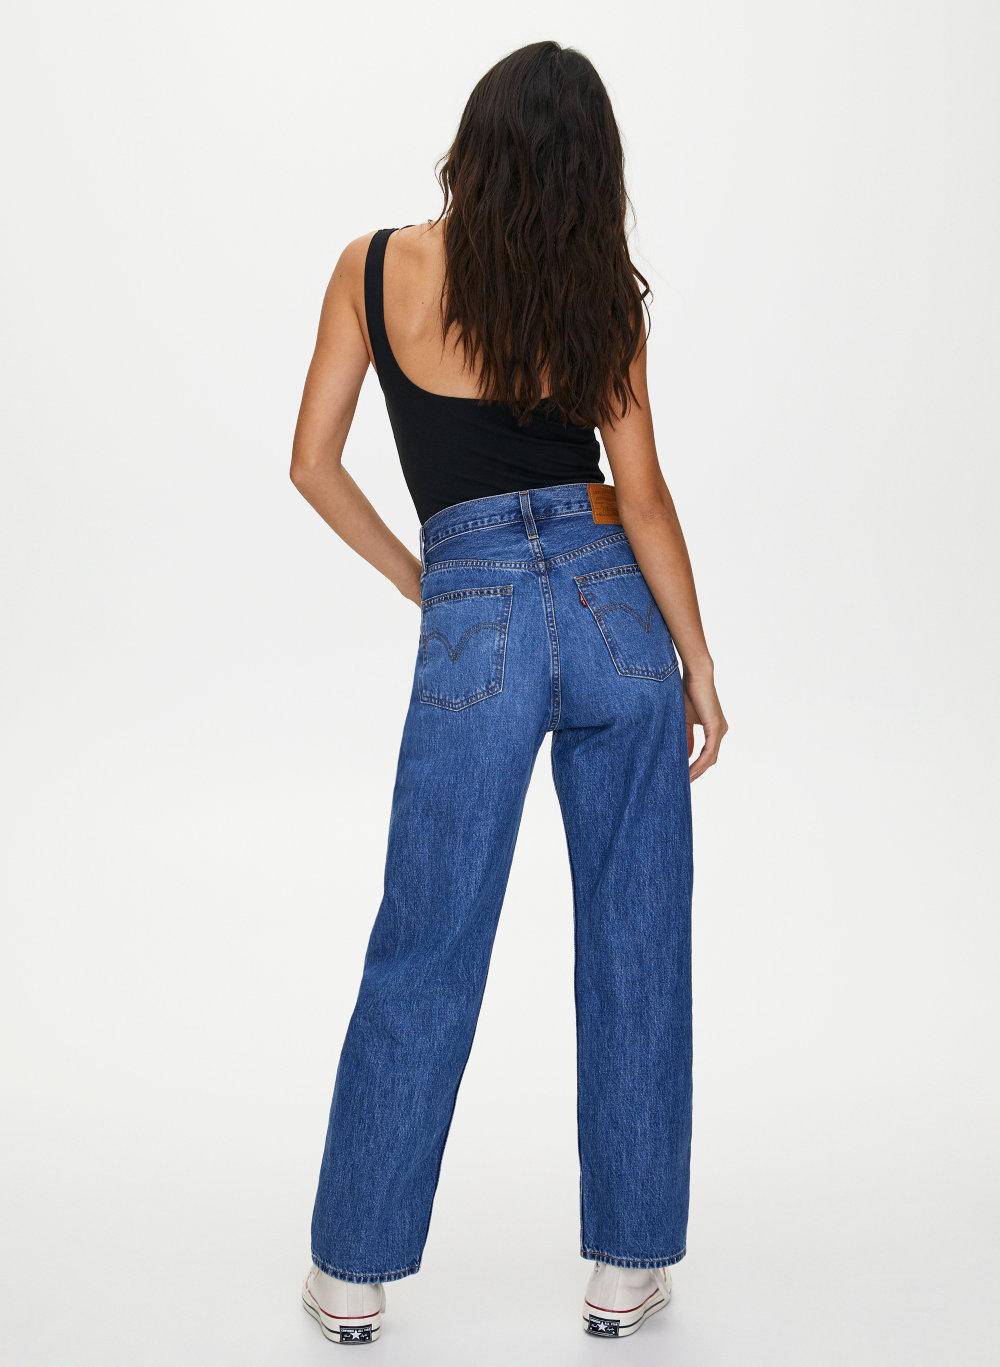 Buy > dad jeans levis > in stock